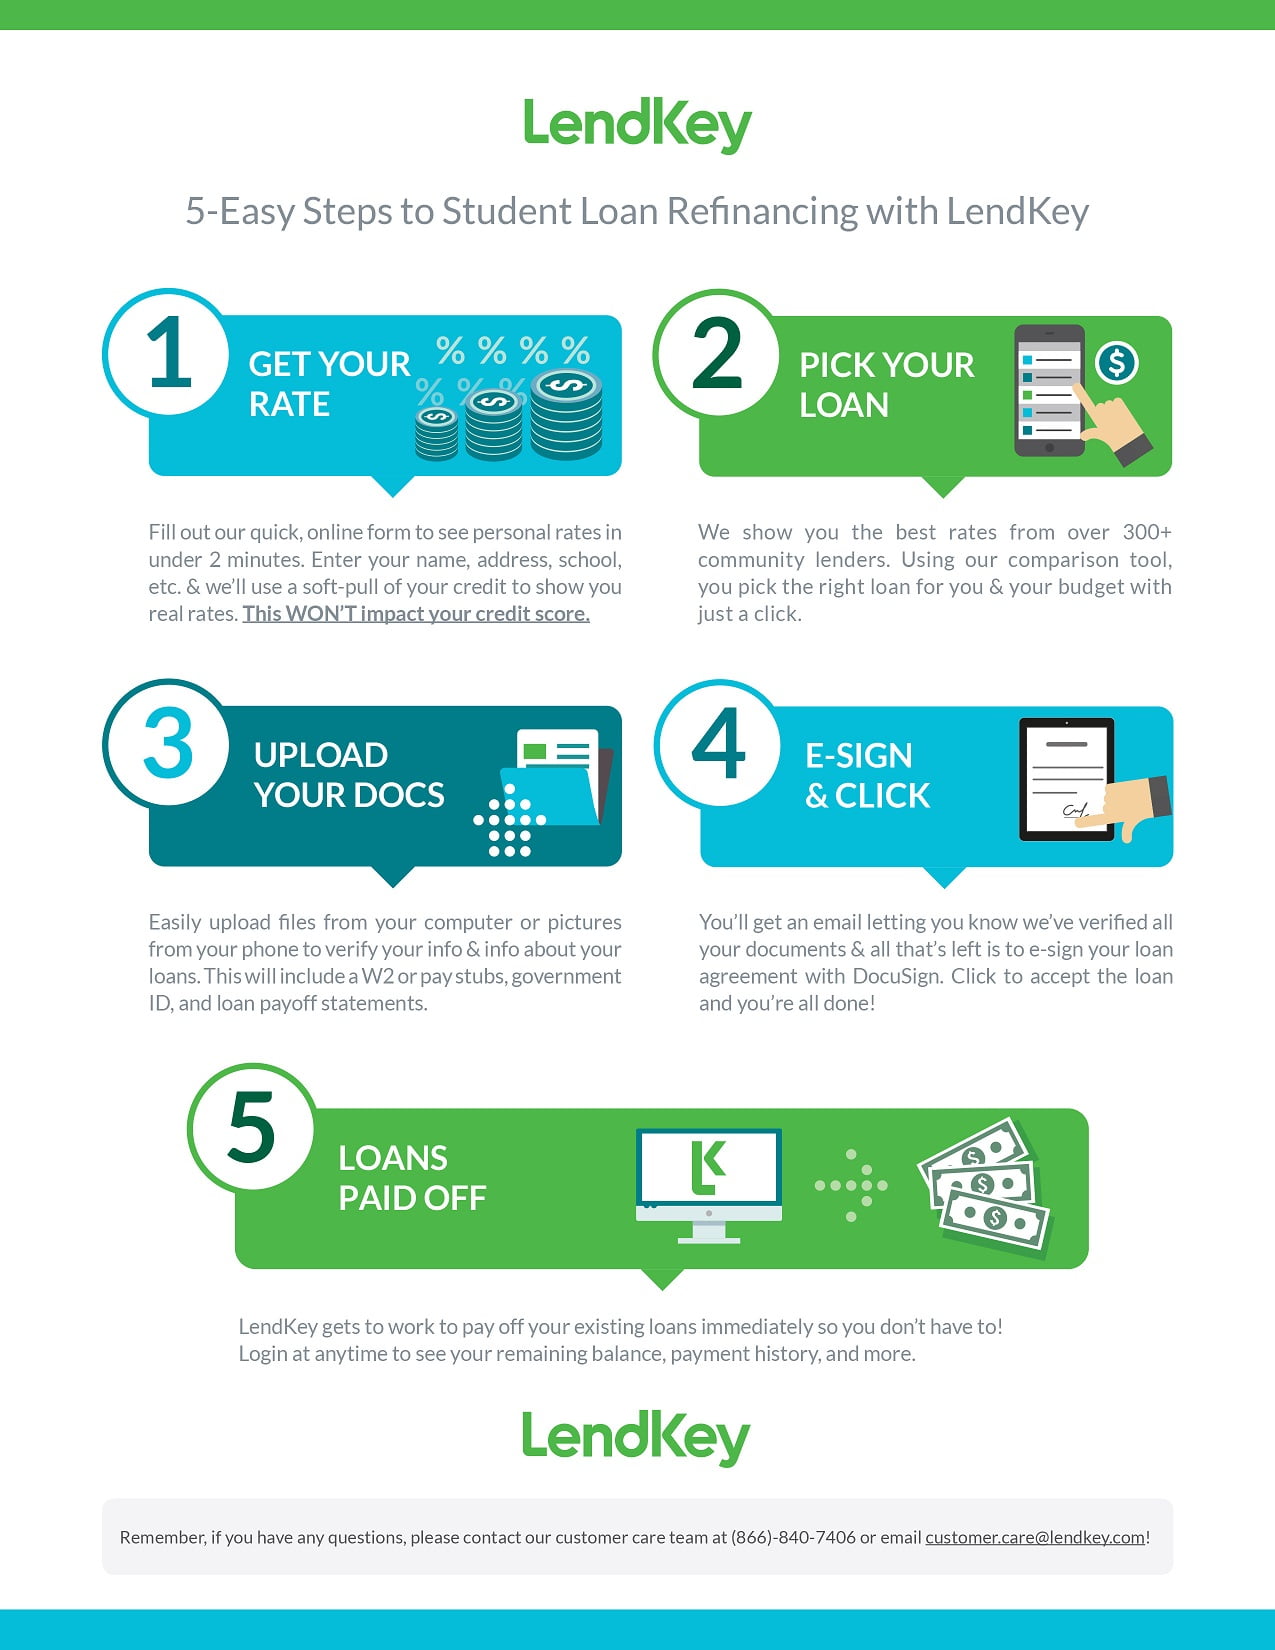 LendKey Review: Affordable Student Loan Refinancing with Community Banks and Credit Unions